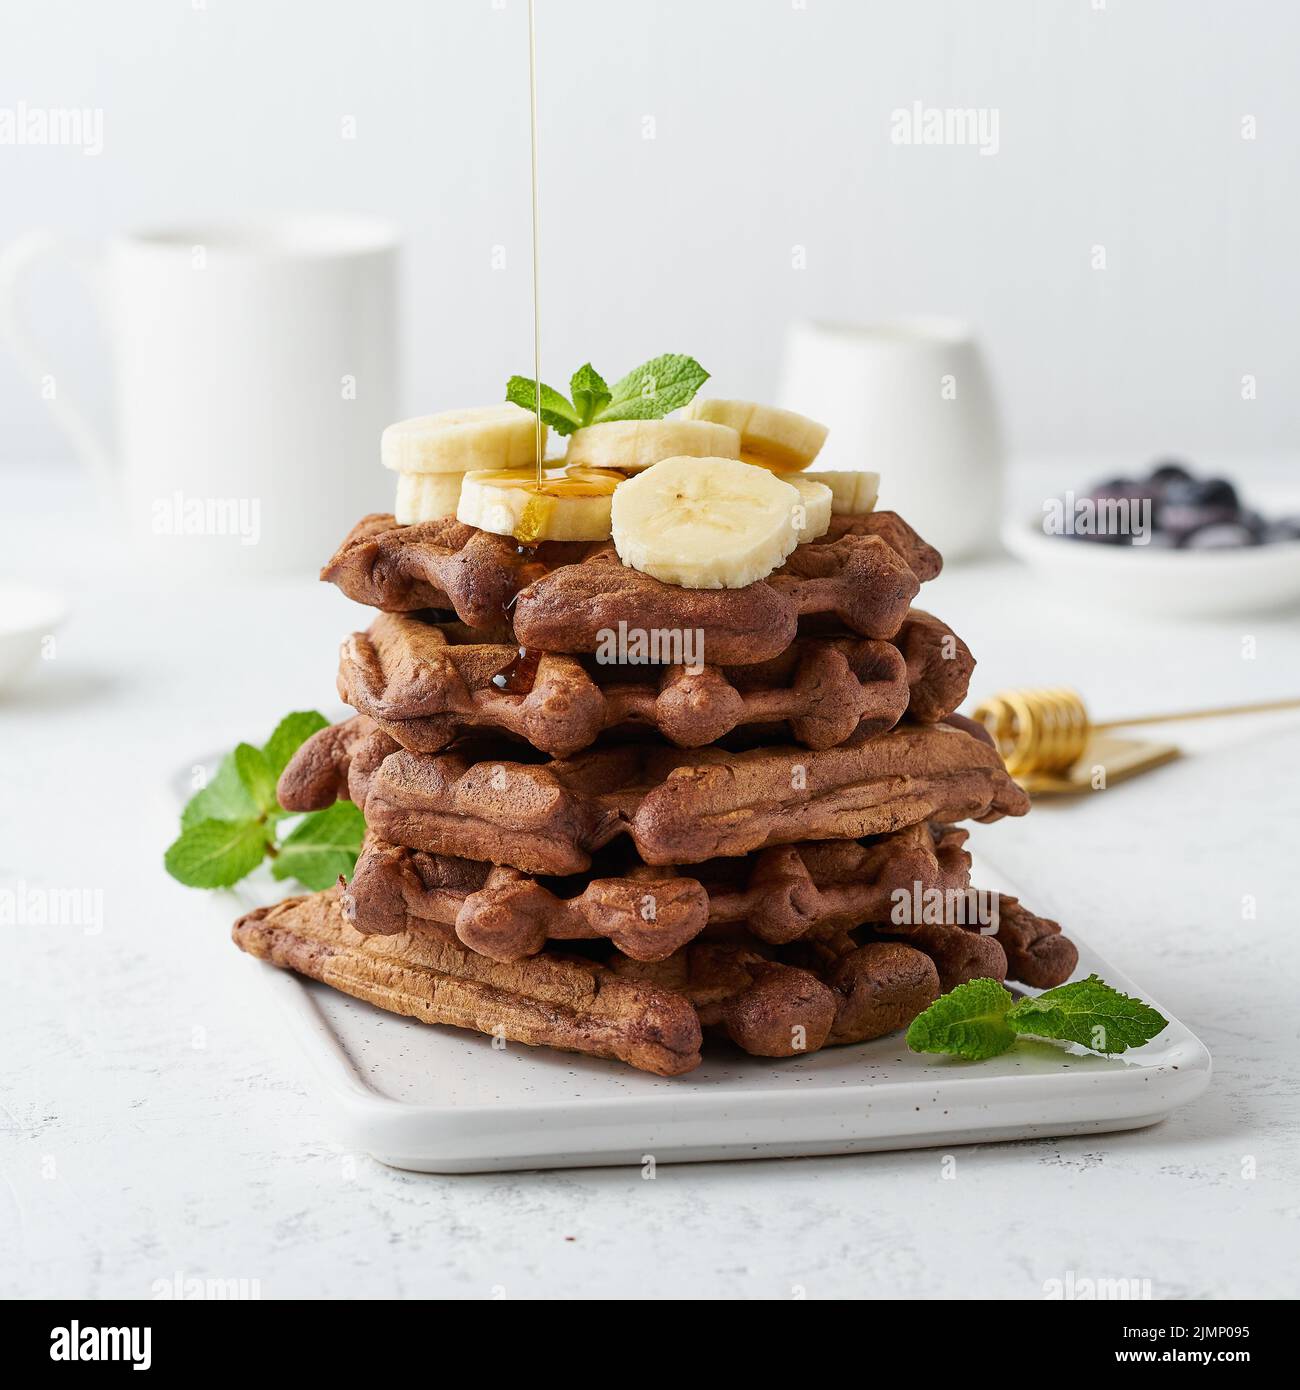 Chocolate banana waffles with maple syrup on white table, side view. Sweet brunch, maple syrup flow Stock Photo